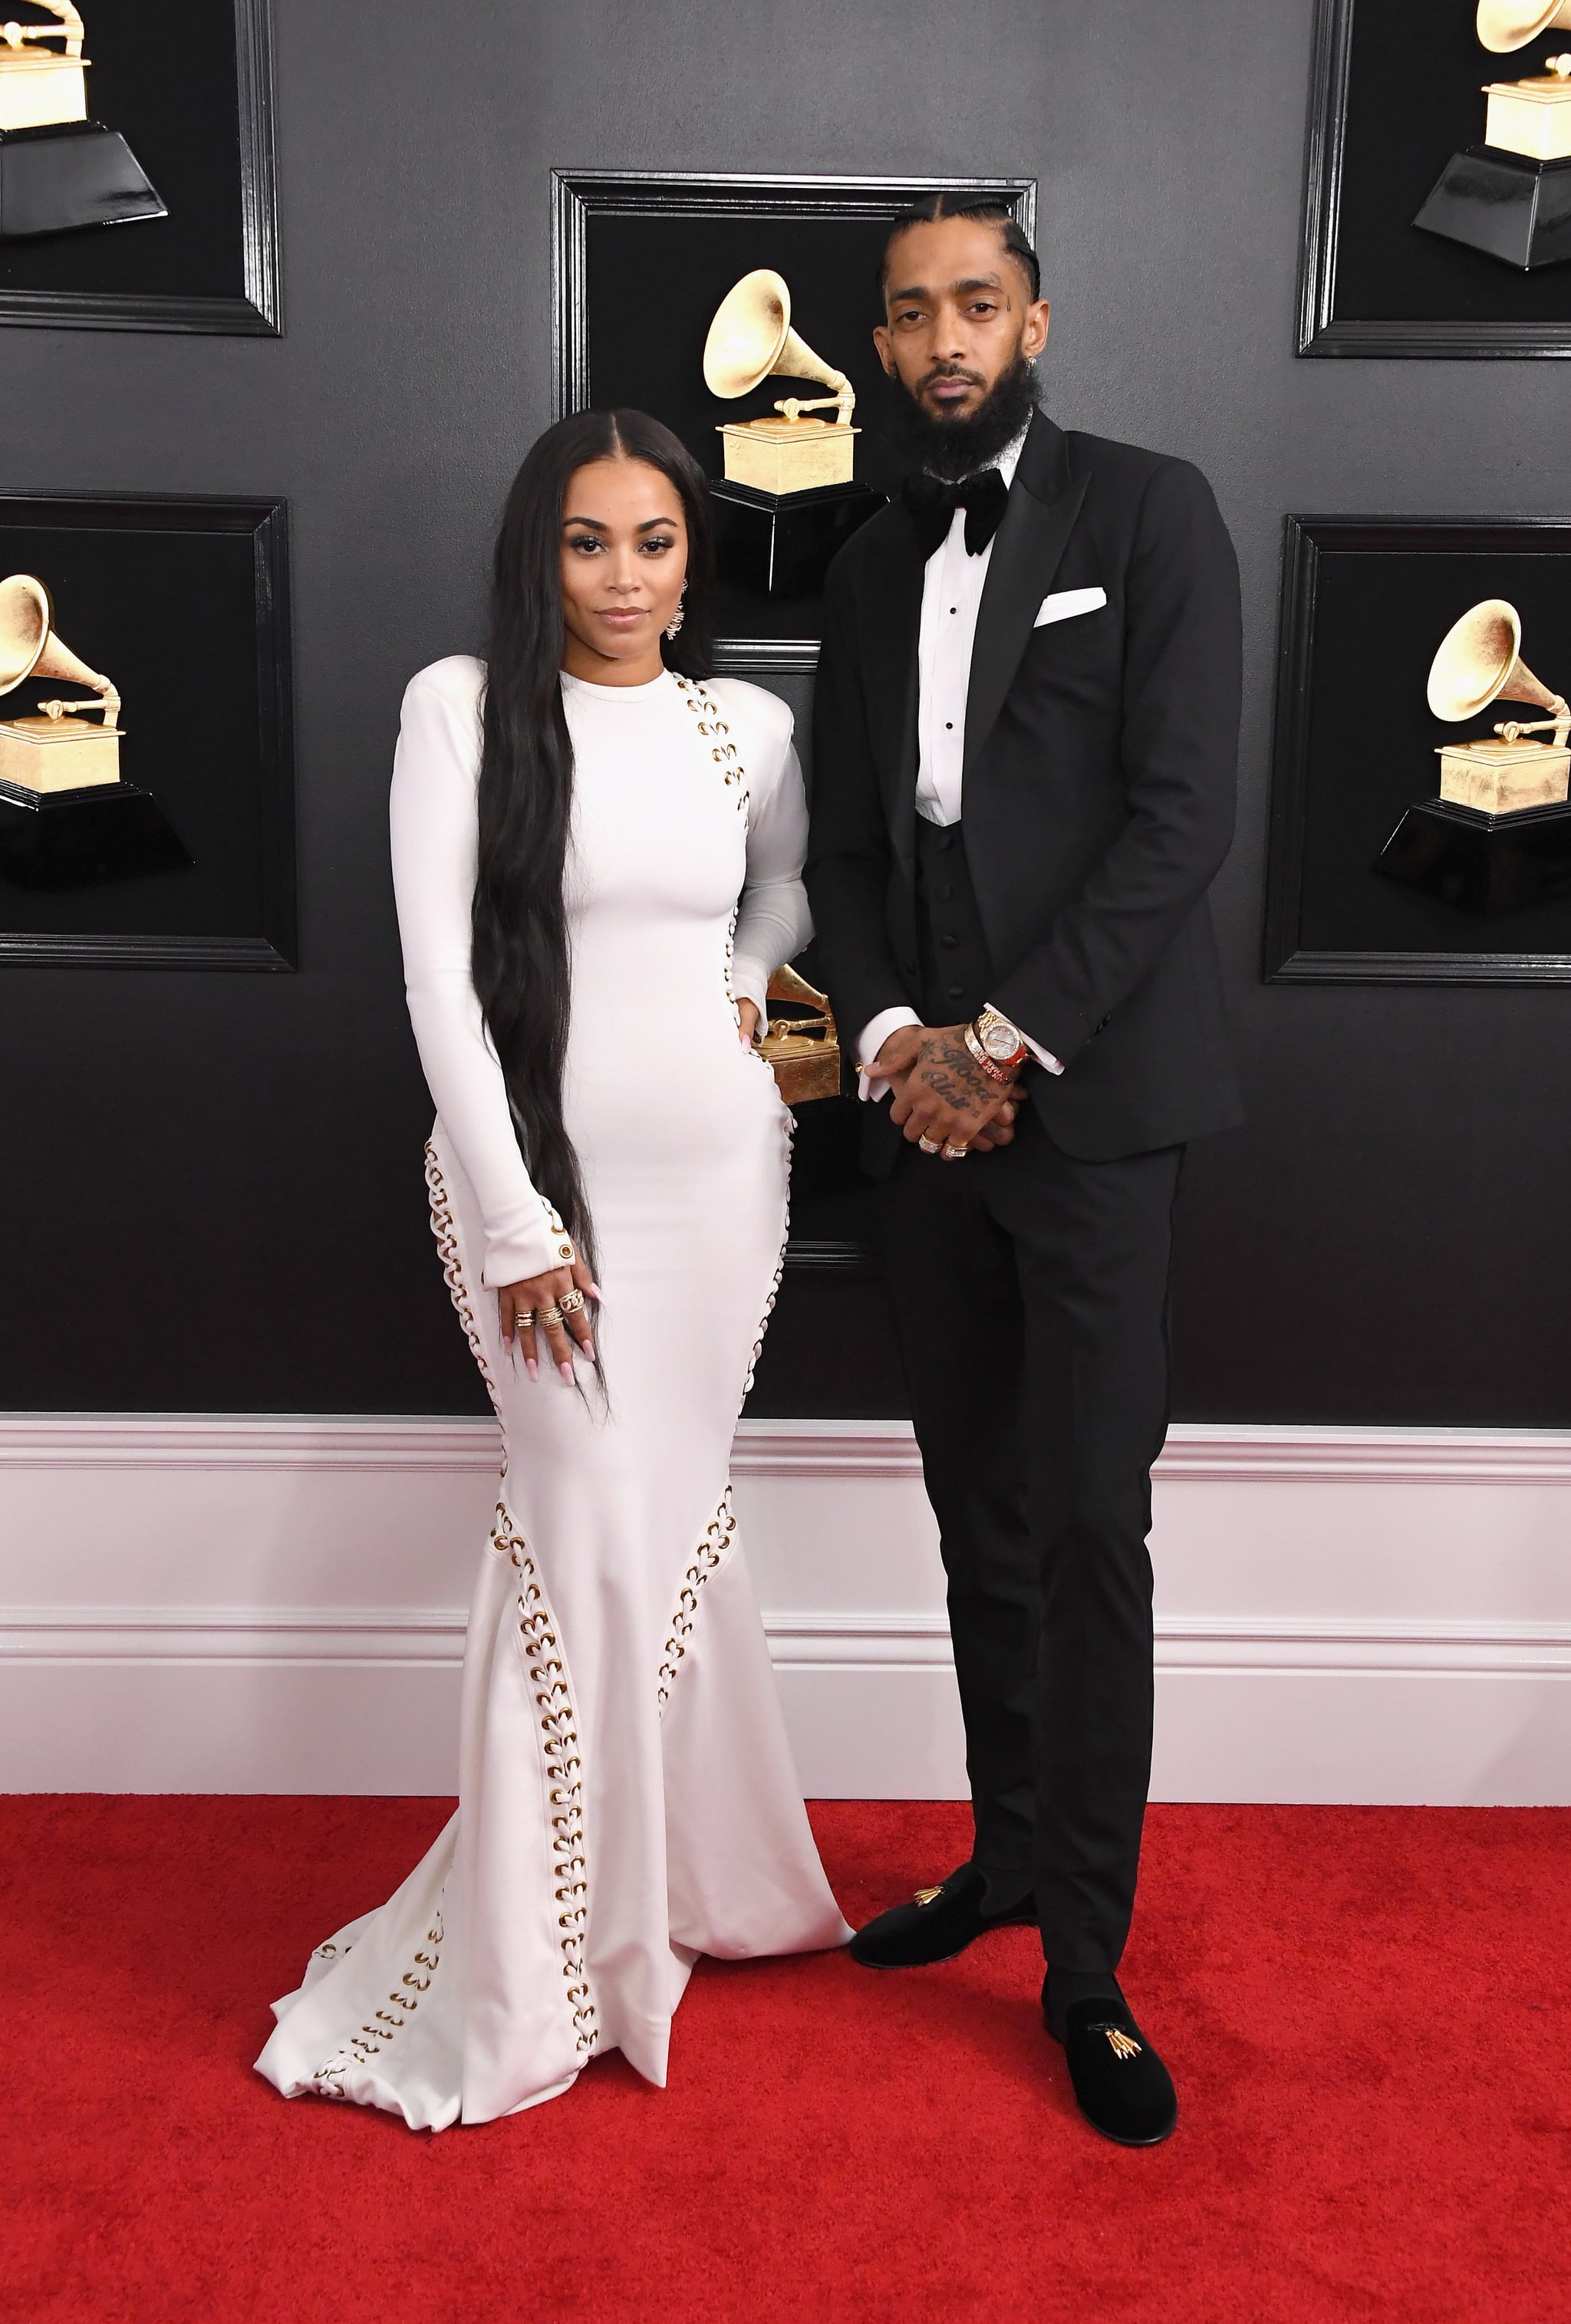 LOS ANGELES, CA - FEBRUARY 10:  Lauren London (L) and Nipsey Hussle attend the 61st Annual GRAMMY Awards at Staples Center on February 10, 2019 in Los Angeles, California.  (Photo by Steve Granitz/WireImage)